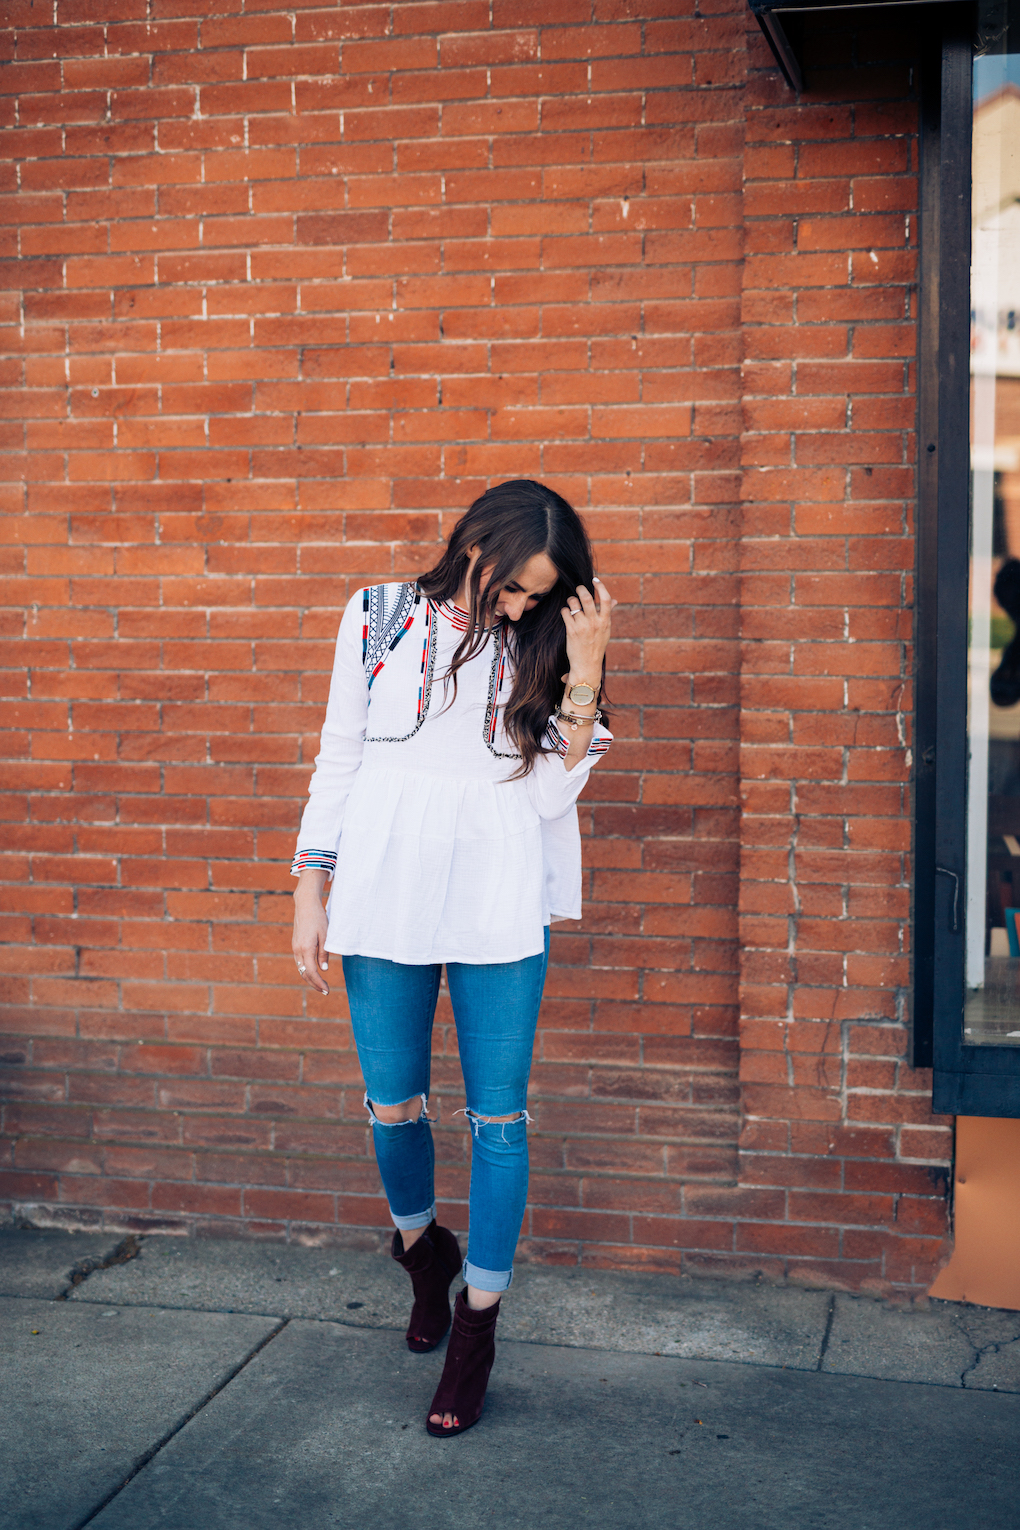 Girl in white peplum top with bright colored embroidery and skinny jeans with maroon booties in front of red wall